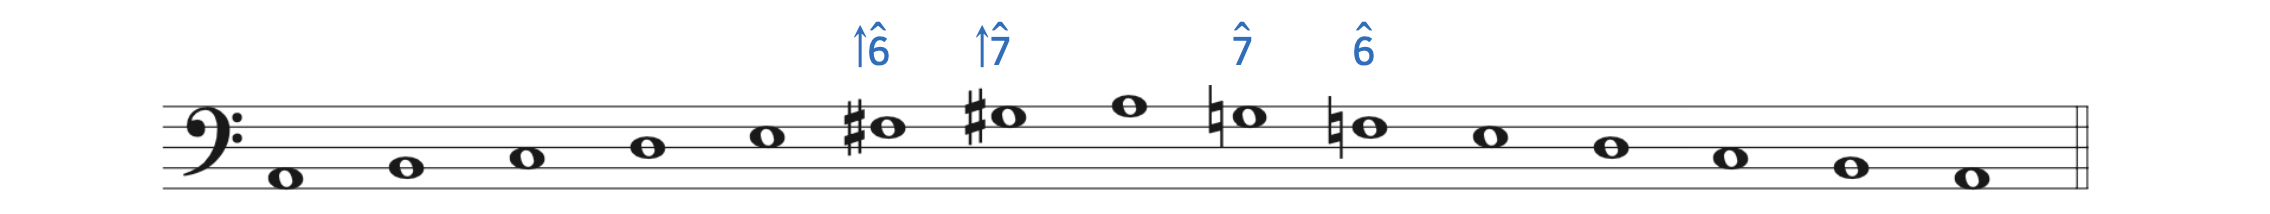 While the submediant and leading tone are raised in the ascending melodic minor scale, they return to the natural minor scale while descending. The A-melodic minor scale adds an F-sharp and G-sharp while ascending and returns to G-natural and F-natural while descending.